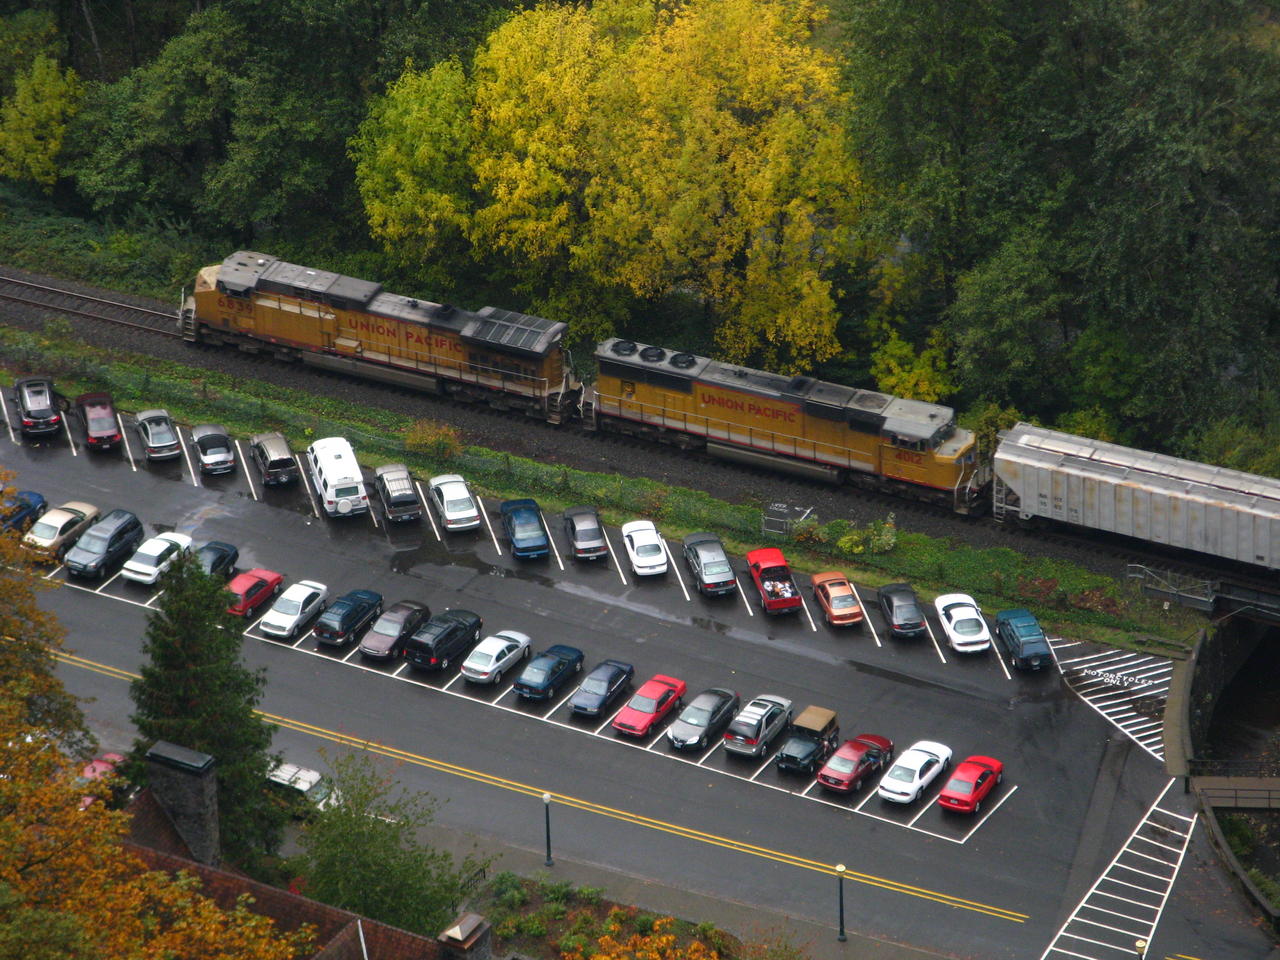 Parking and Train